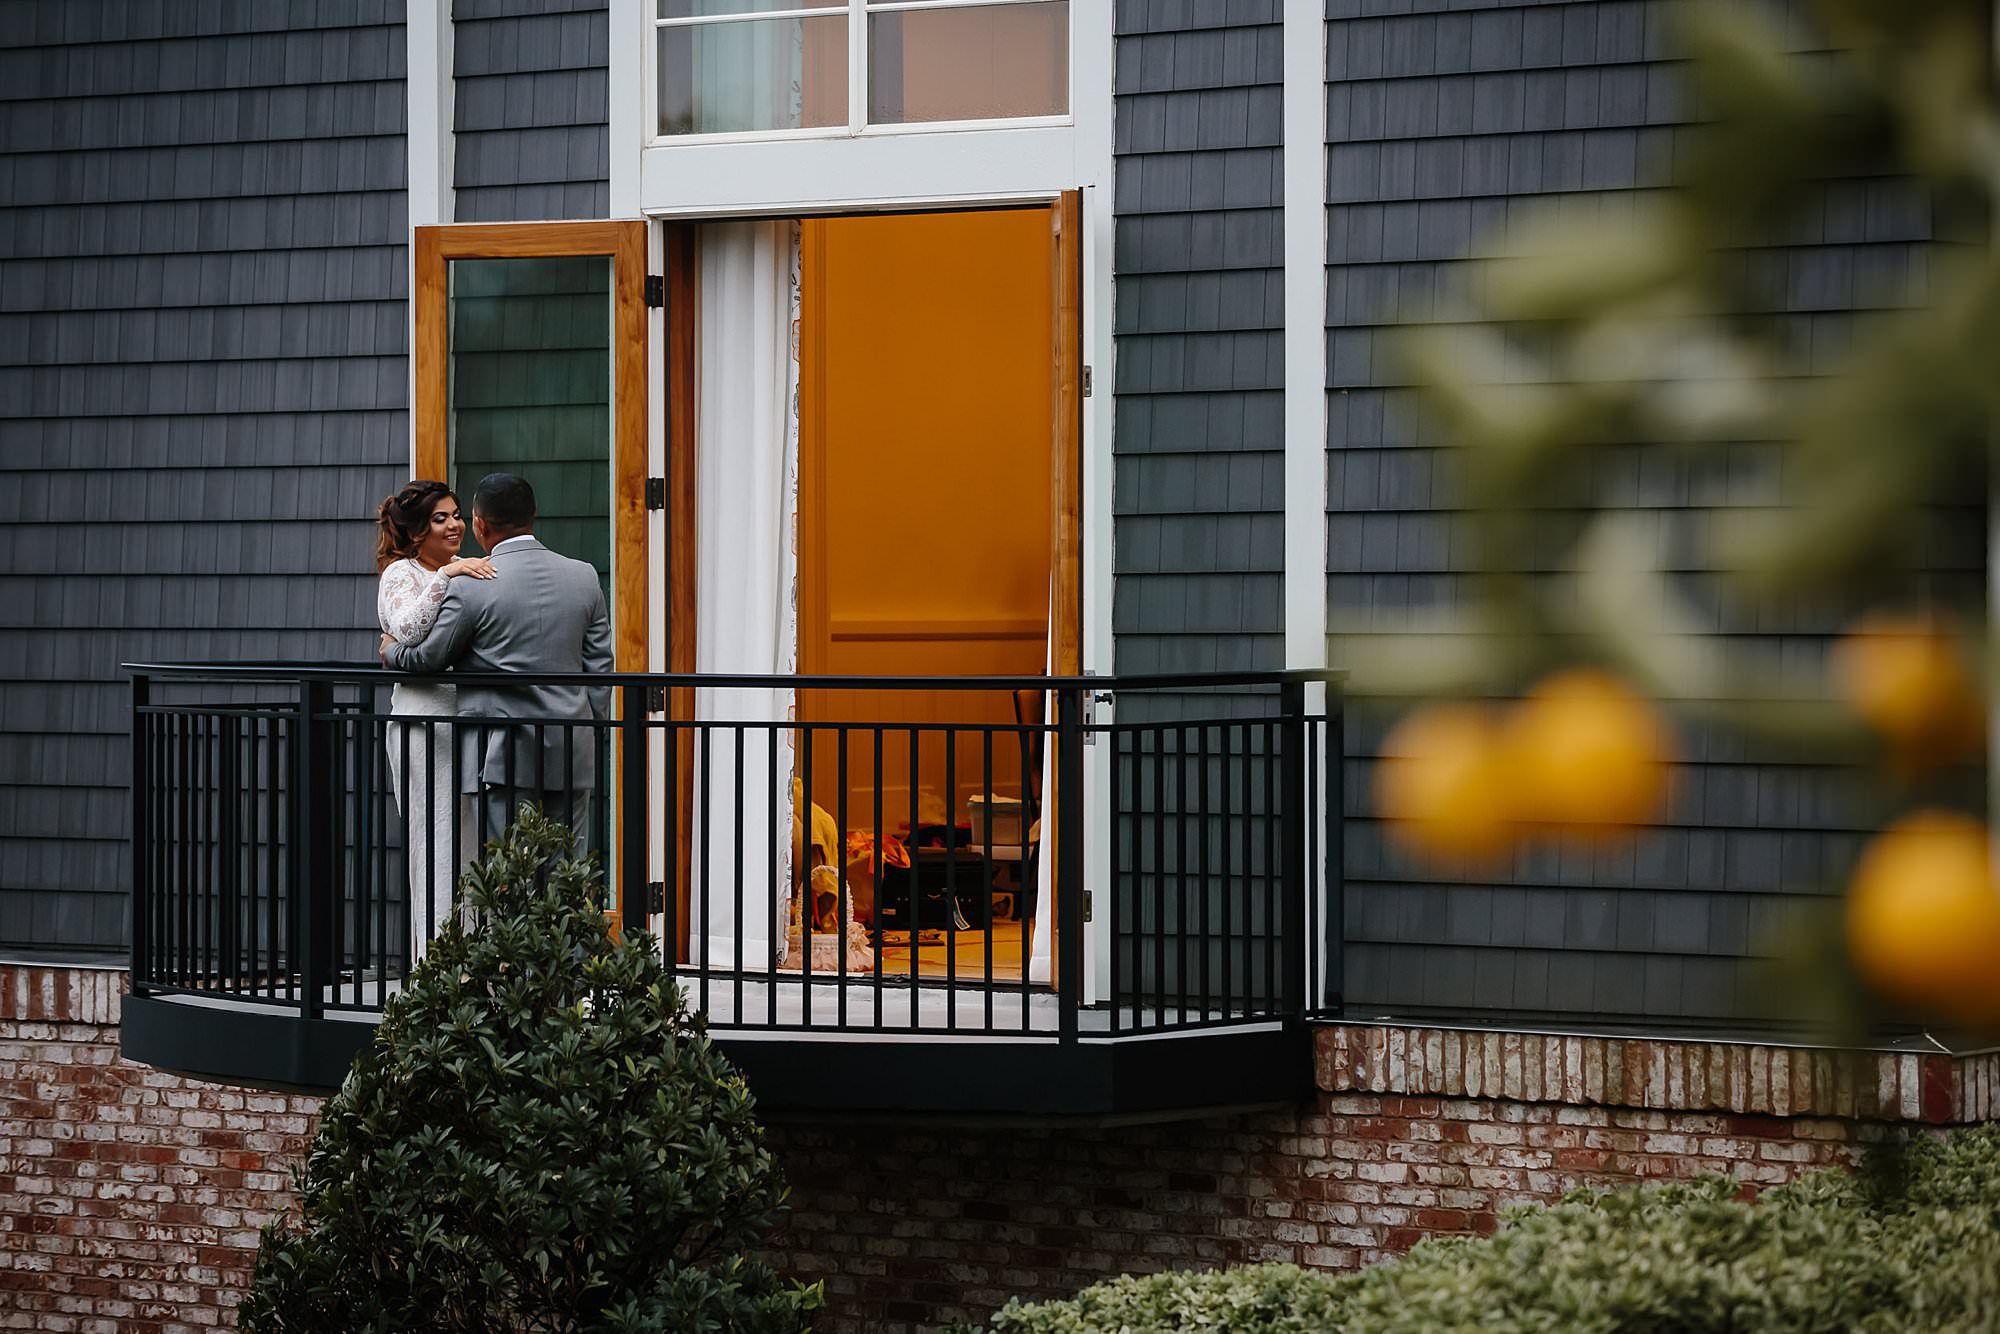 Bride and groom on the balcony of the bridal suite at the Henderson Beach Resort and Spa durning a break in the rain